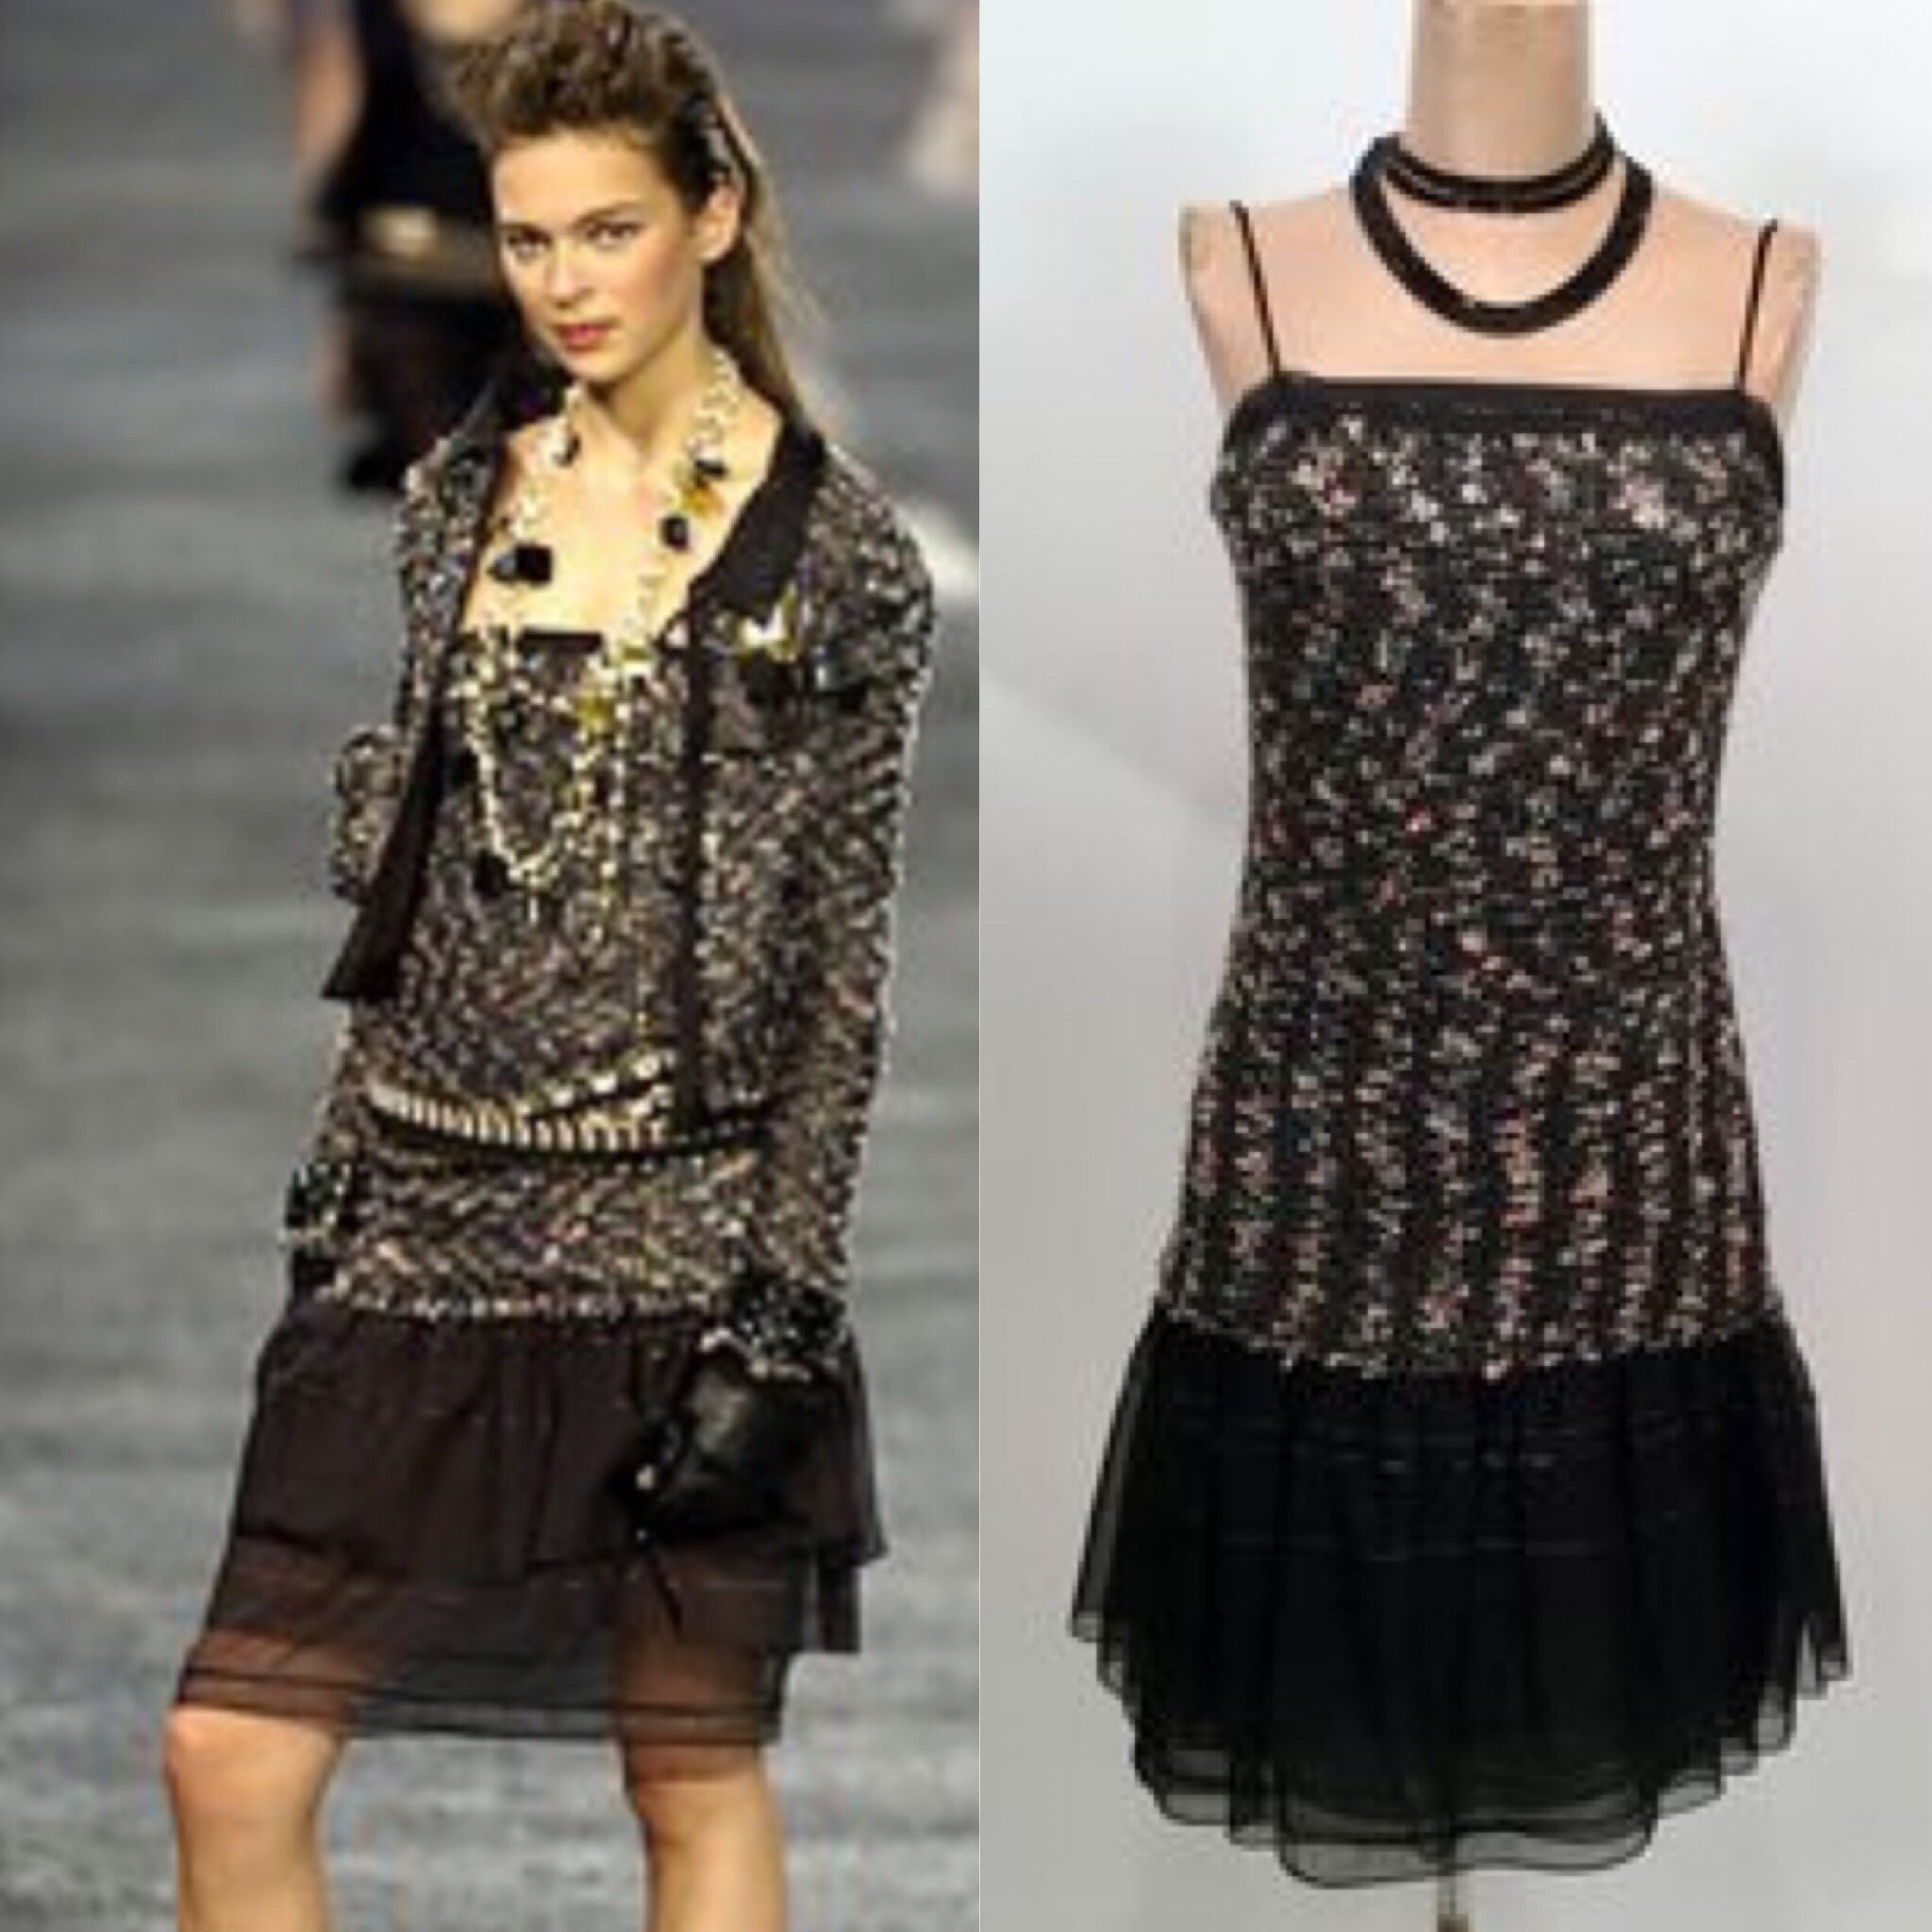 HelensChanel Rare Chanel 03p, 2003 Spring Camellia Flower Pink Black Lace Satin Blouse with Matching Skirt Set FR 36 US 4